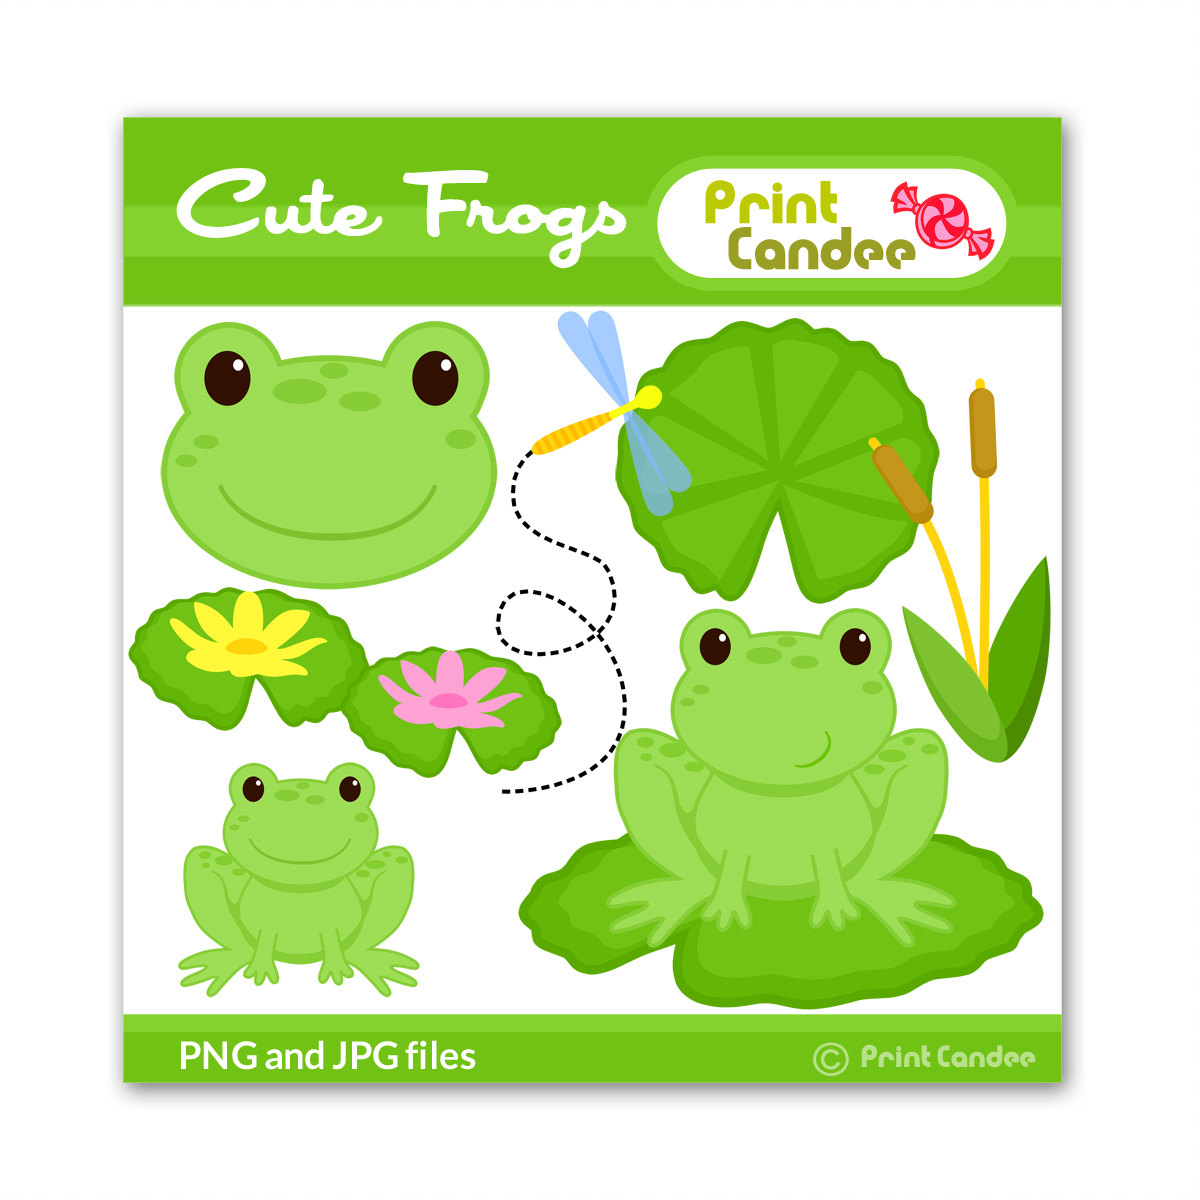 Cute Frogs Digital Clip Art Personal And By Printcandee On Etsy